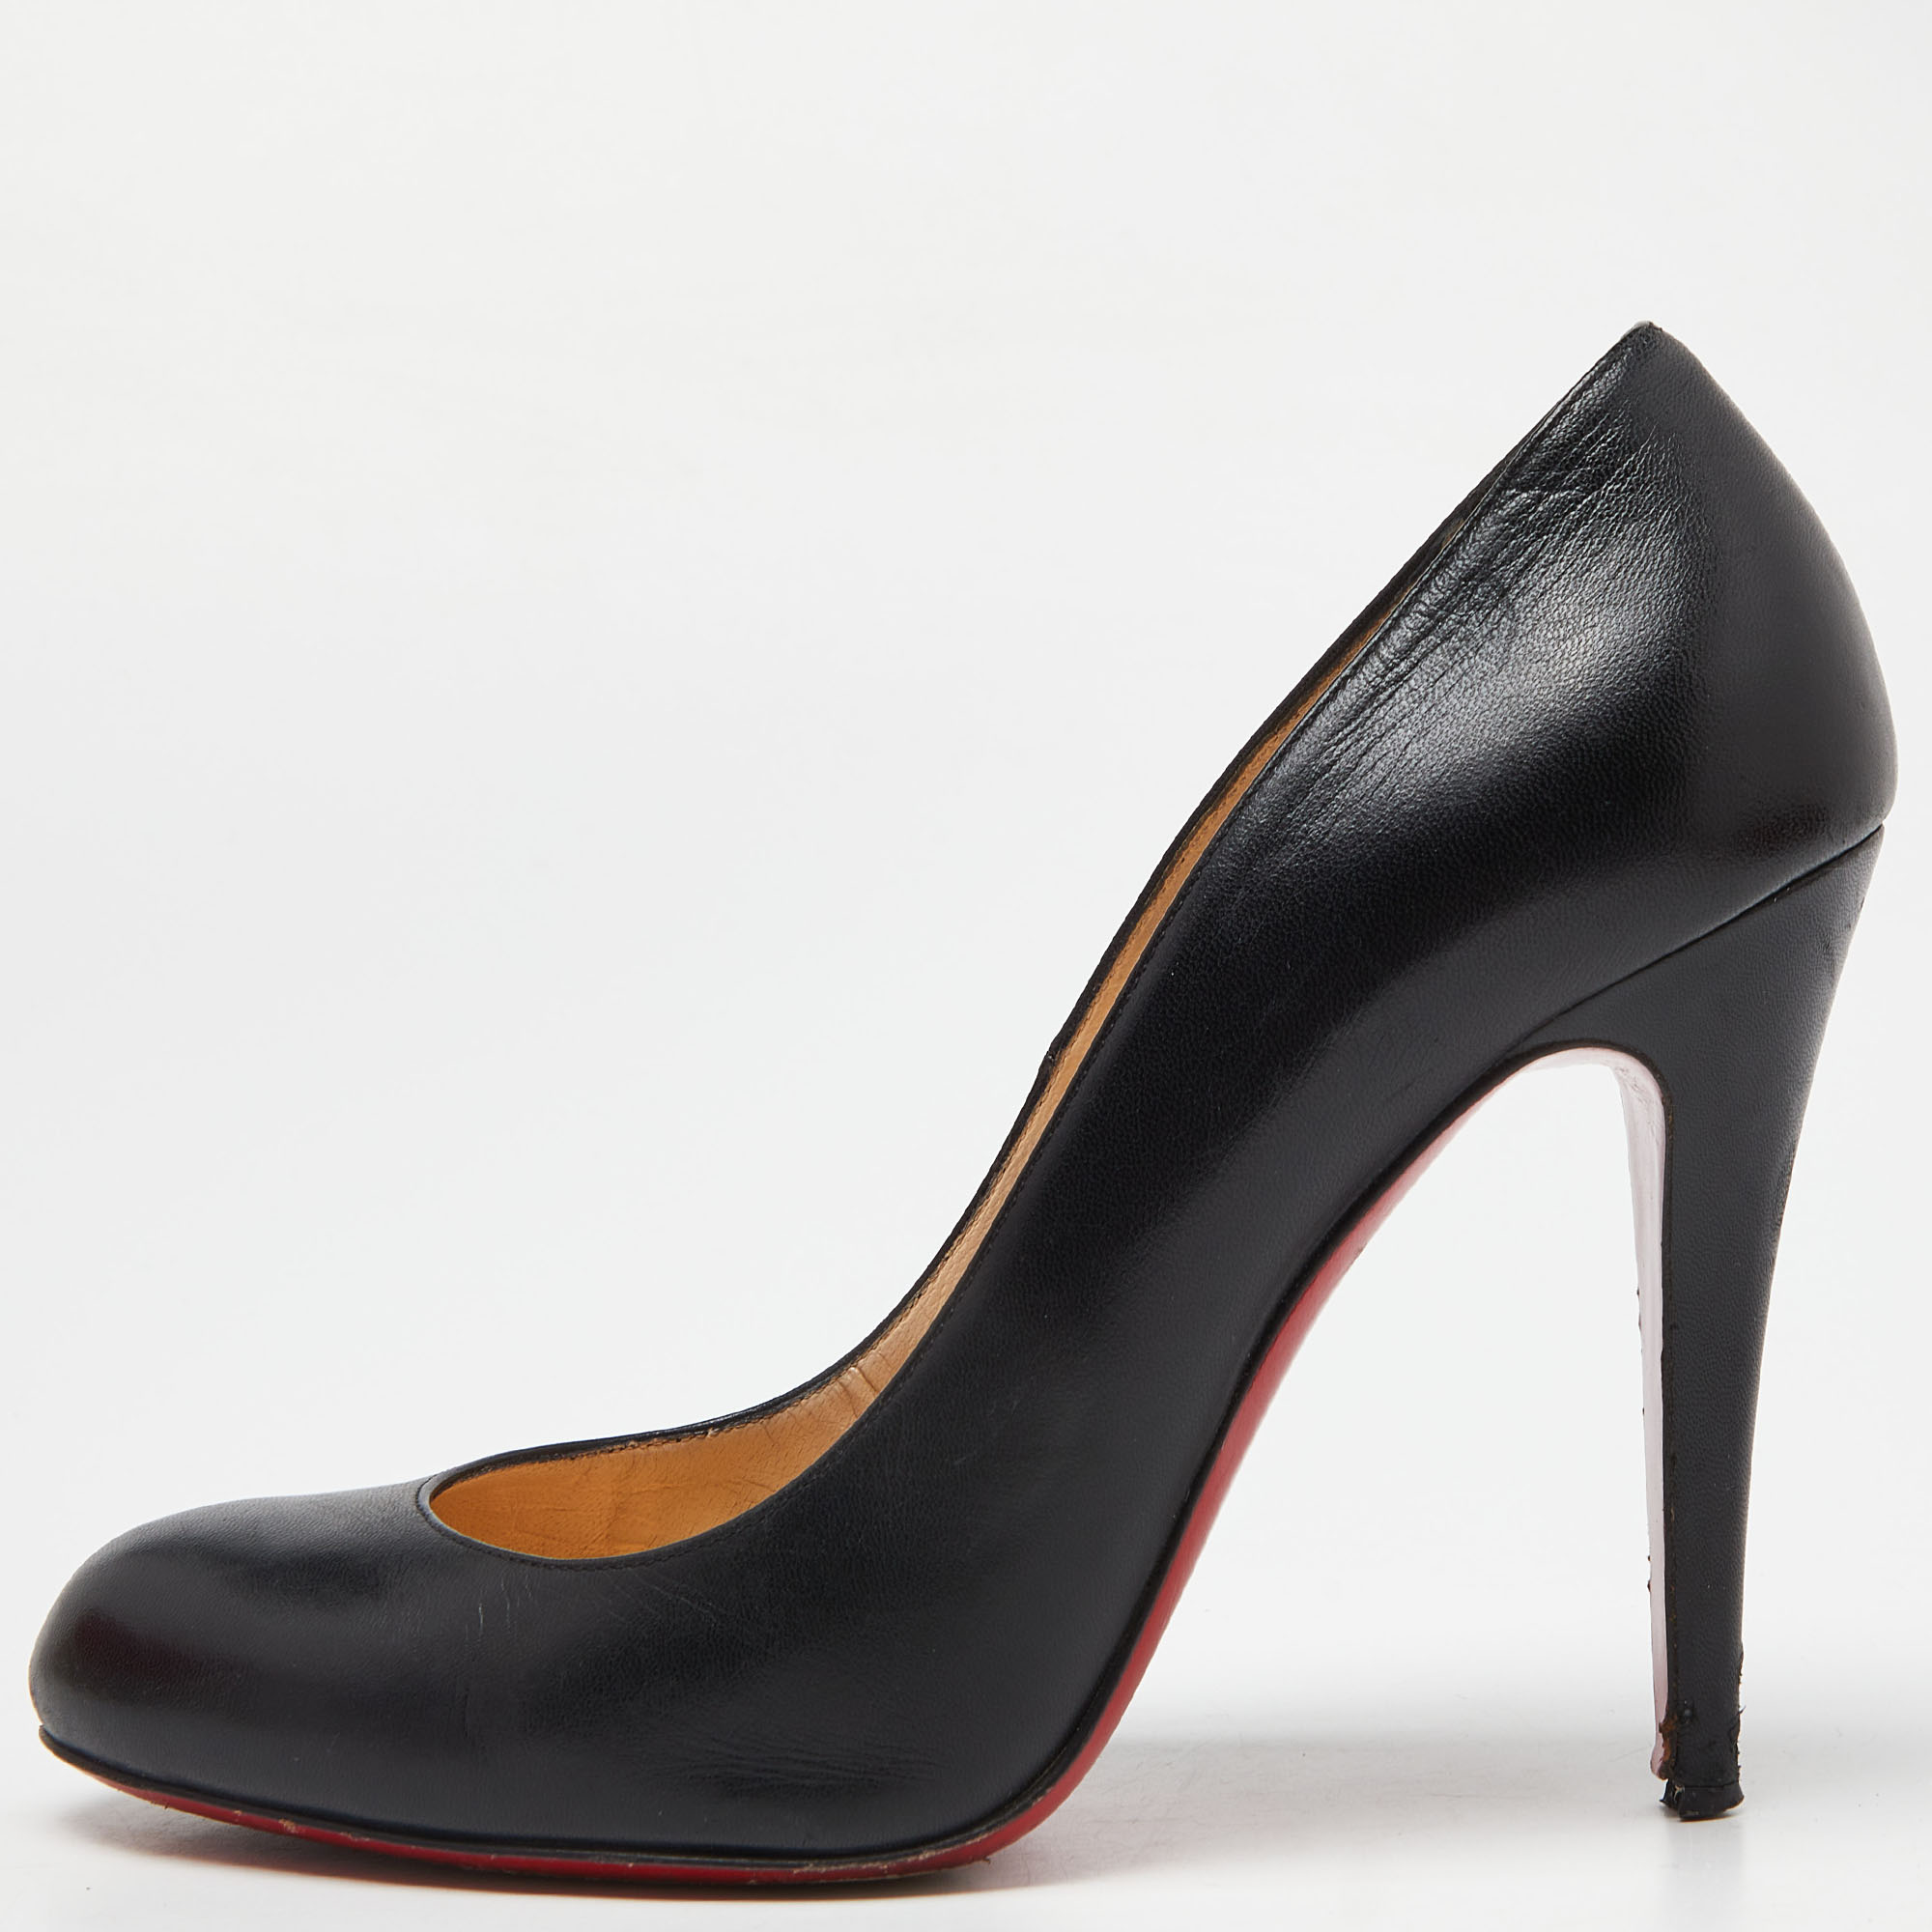 Pre-owned Christian Louboutin Black Leather Ron Ron Pumps Size 38